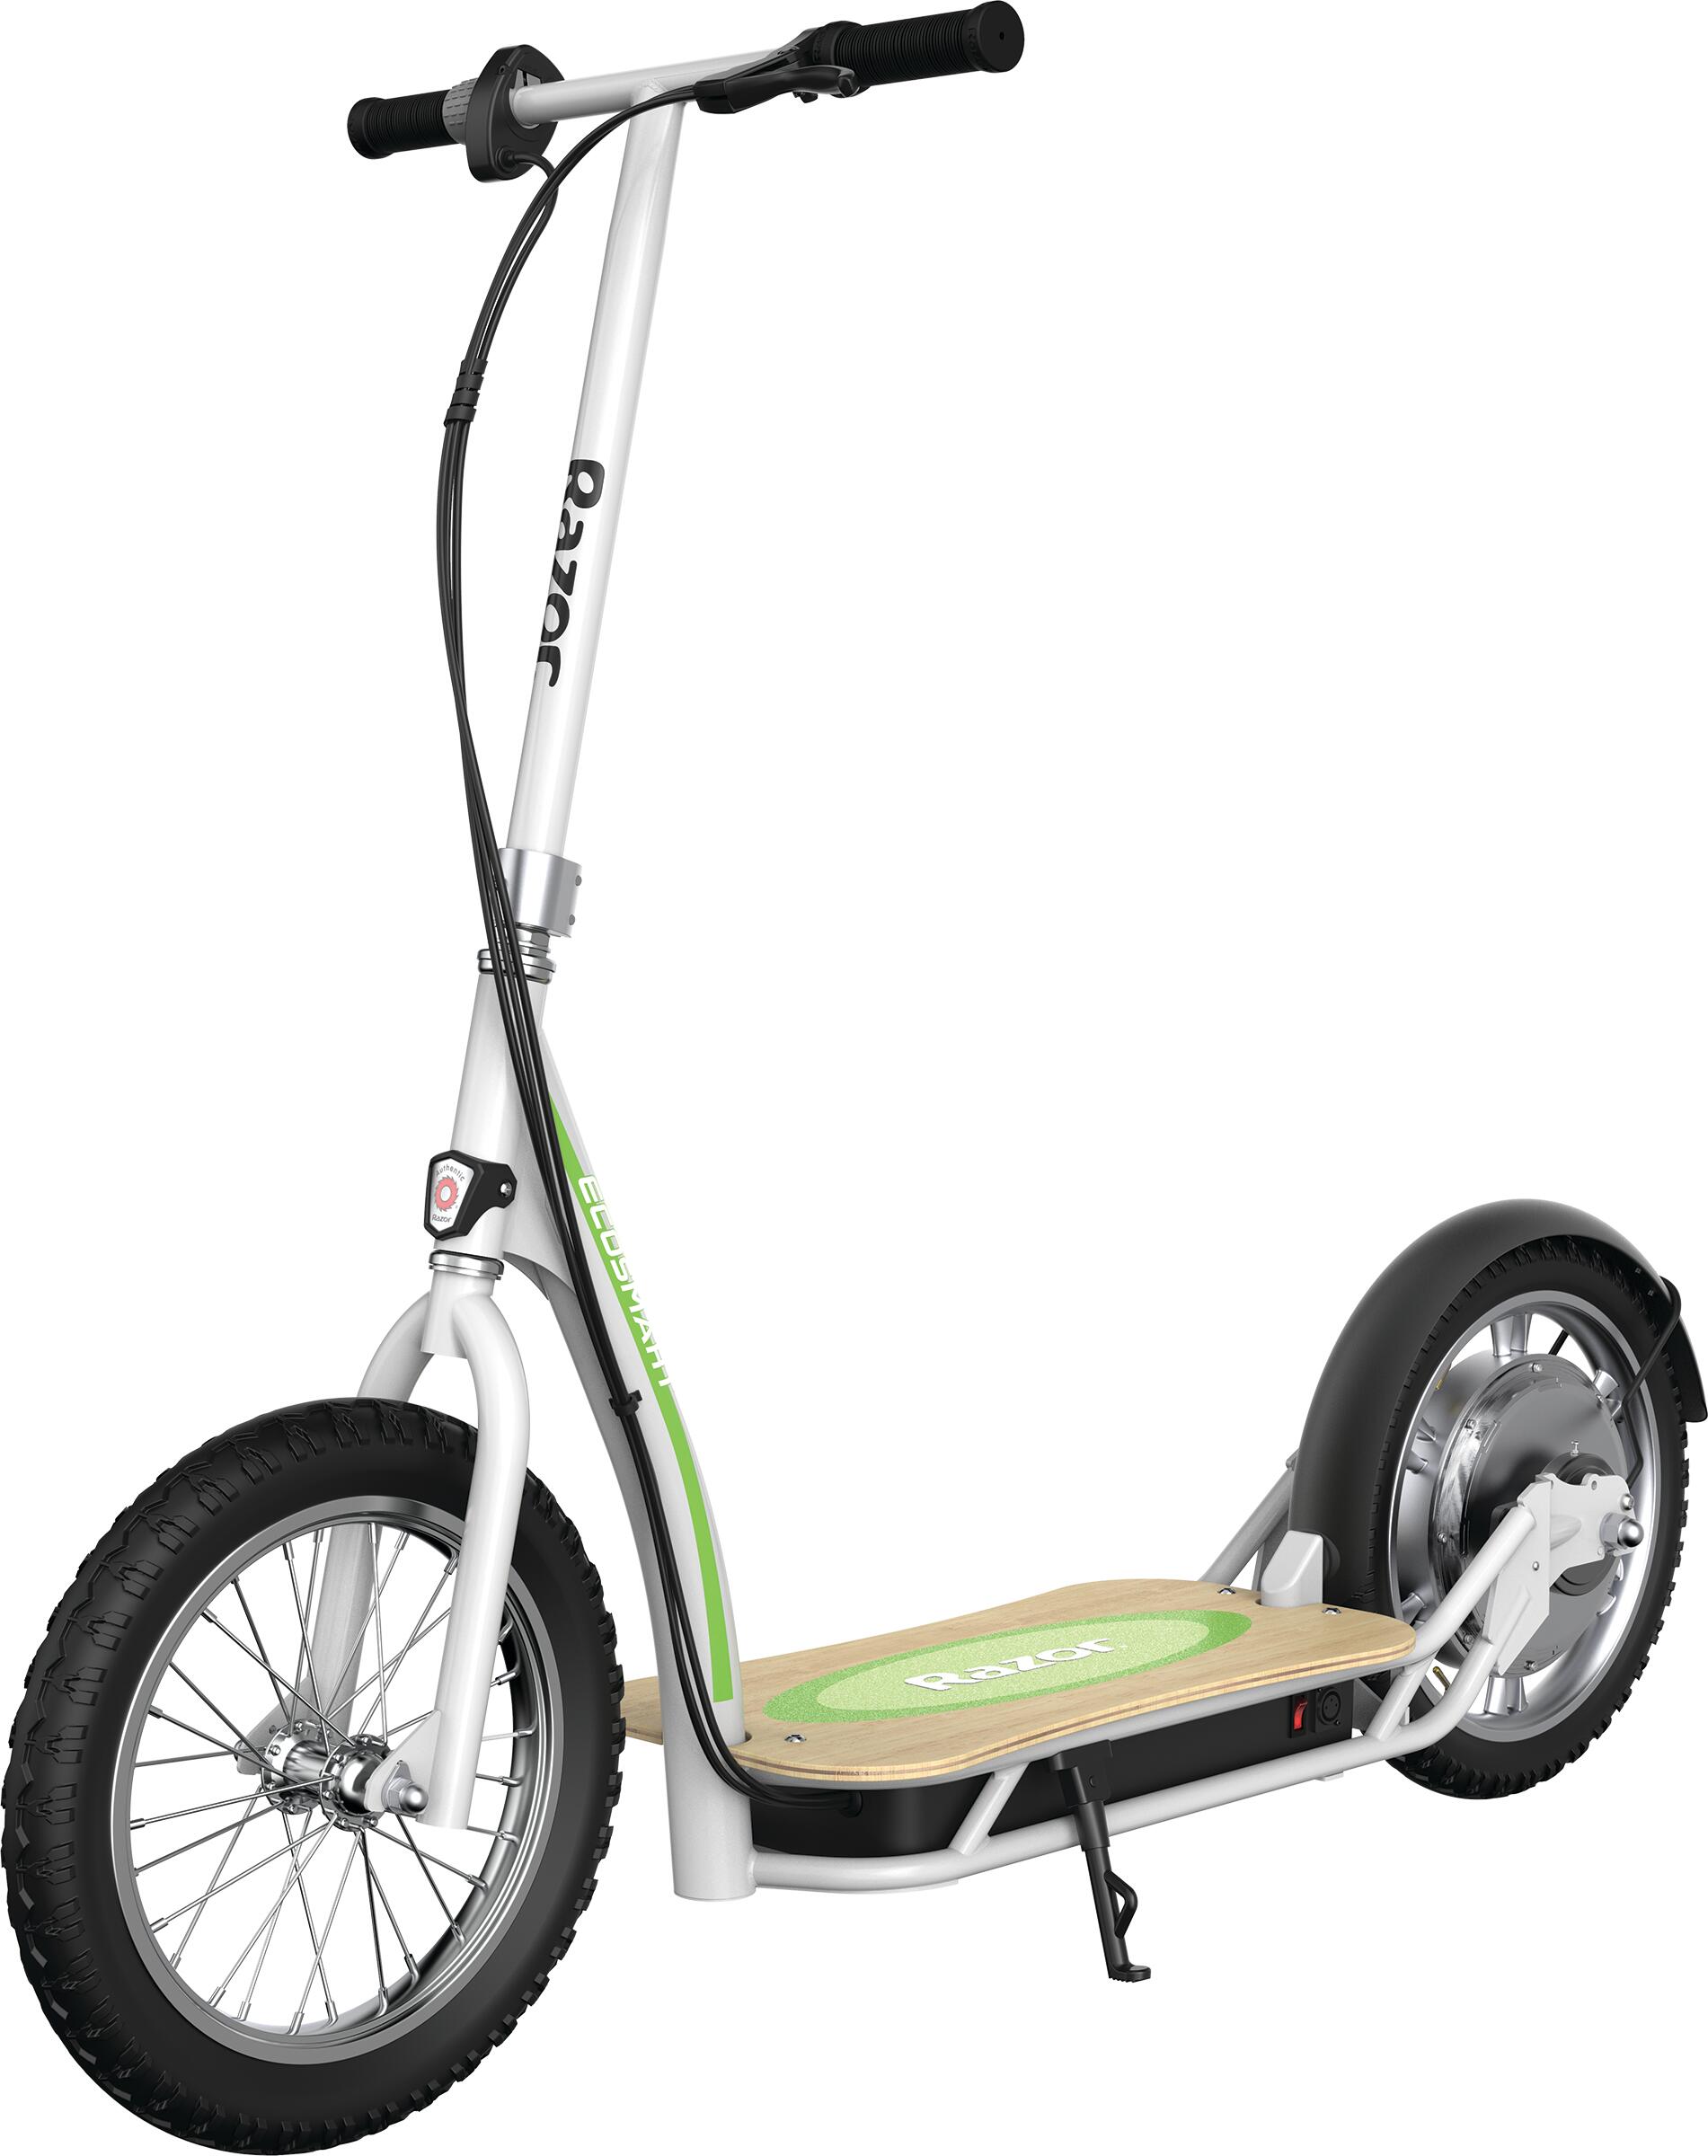 Razor Eco Smart 36 Volt Scooter with Bamboo Deck - Black 1/5